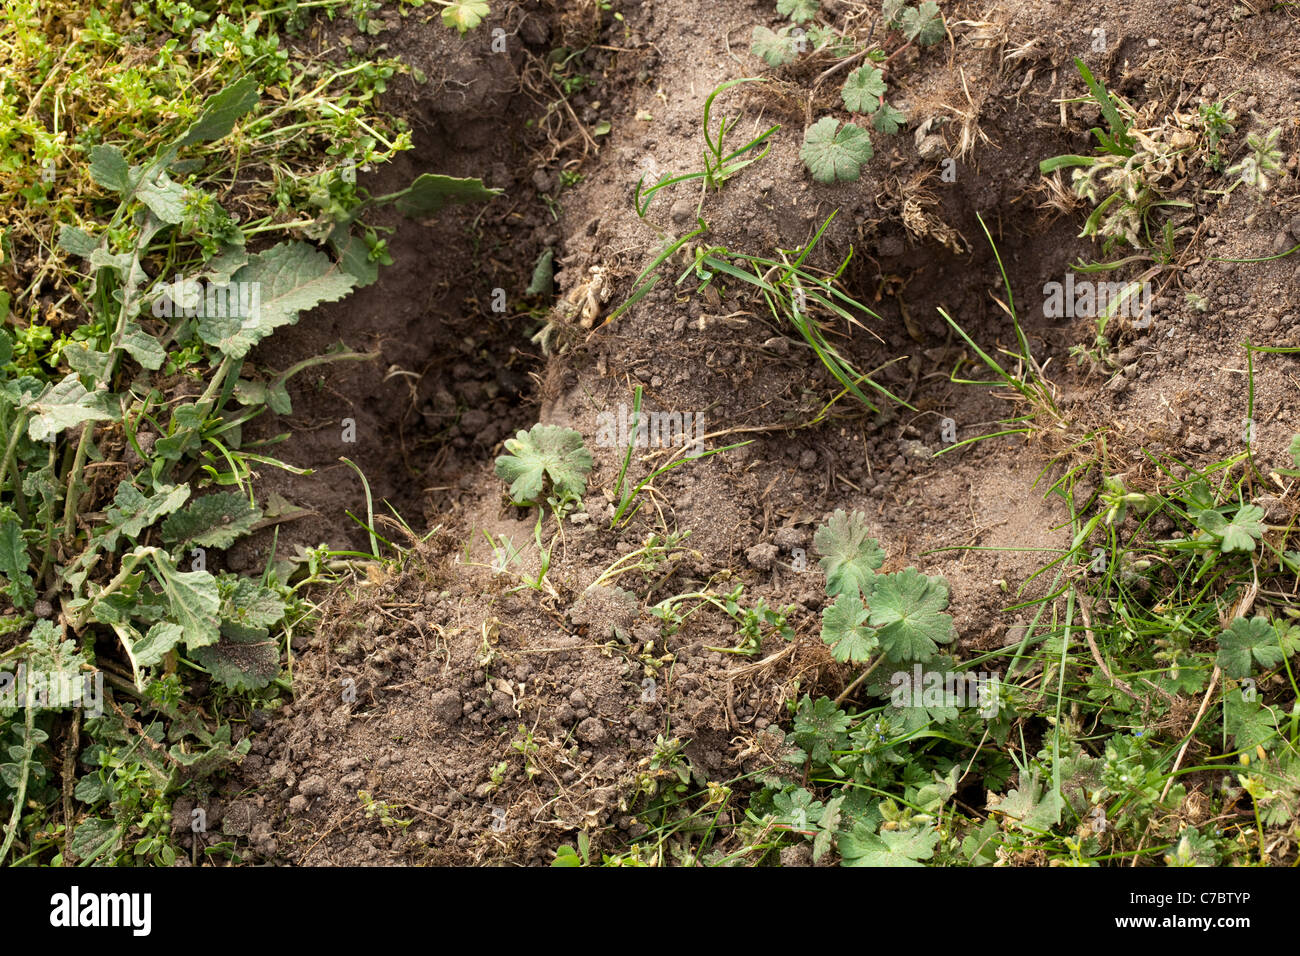 Rabbit (Oryctolagus cuniculus), excavated hole after searching for grass and herb roots. Stock Photo